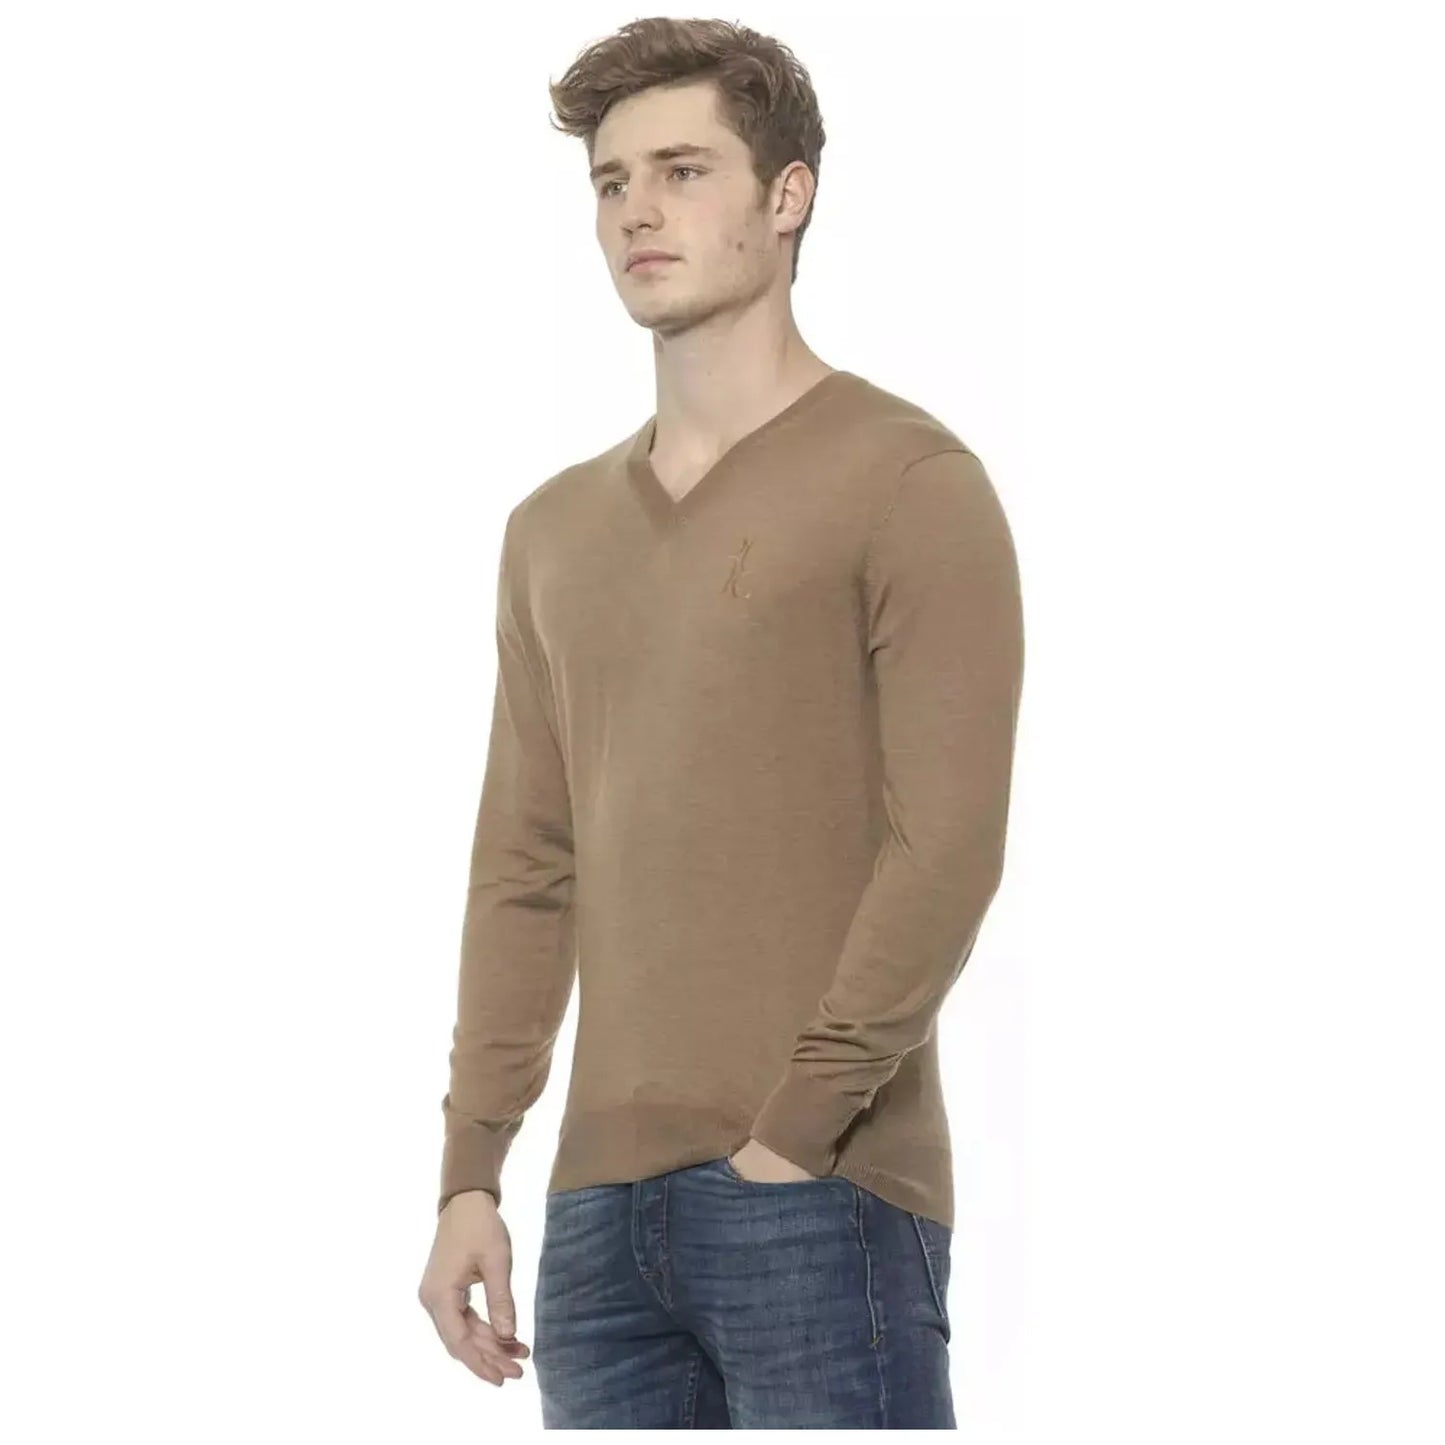 Billionaire Italian Couture Elegant Beige V-Neck Cashmere Sweater for Men tabacco-sweater stock_product_image_19963_477586323-20-54d6ab1a-252.webp